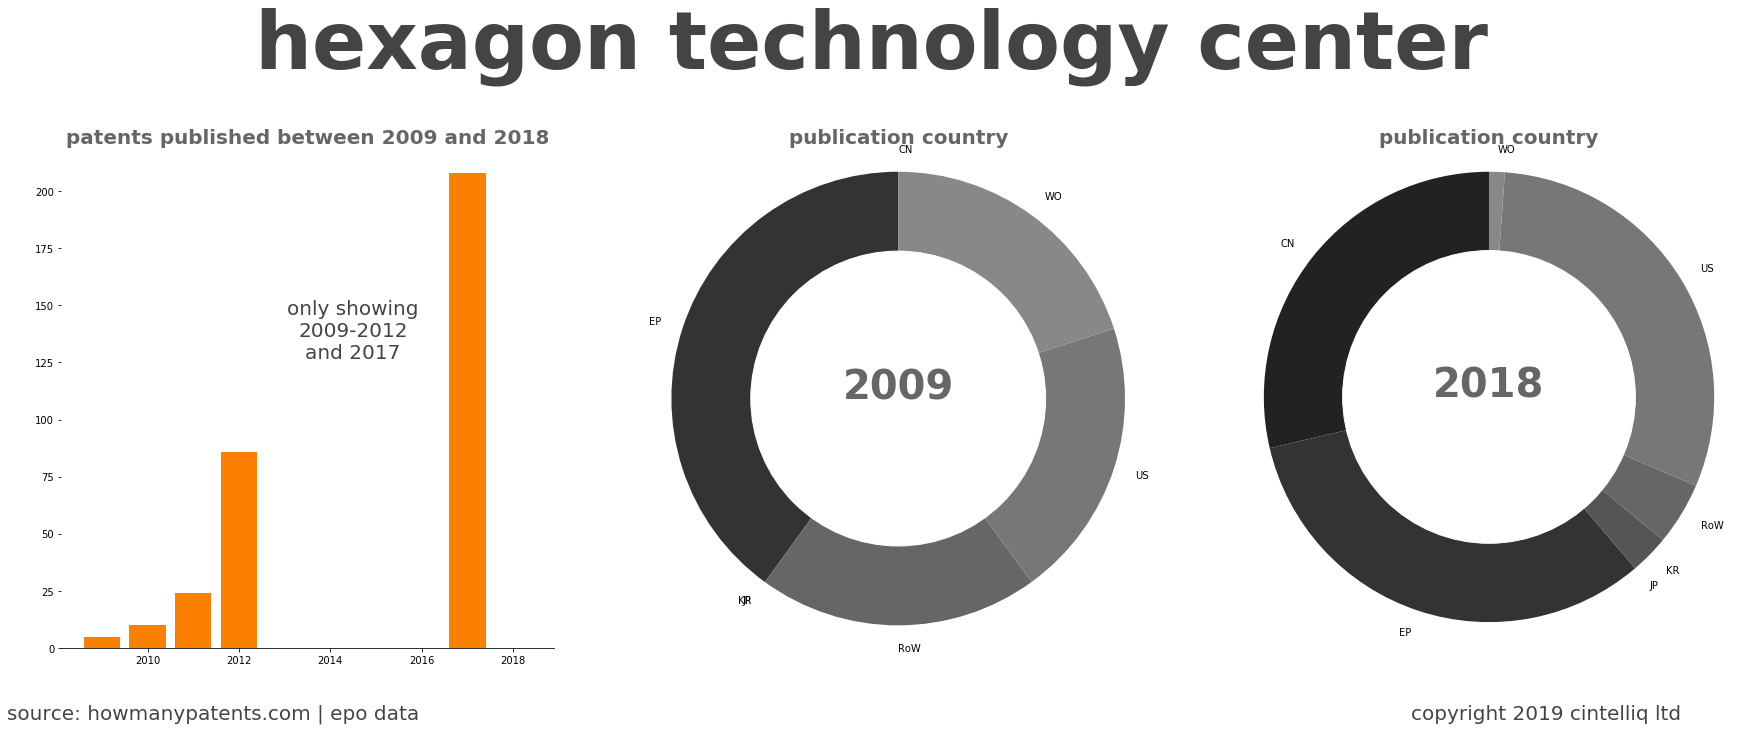 summary of patents for Hexagon Technology Center